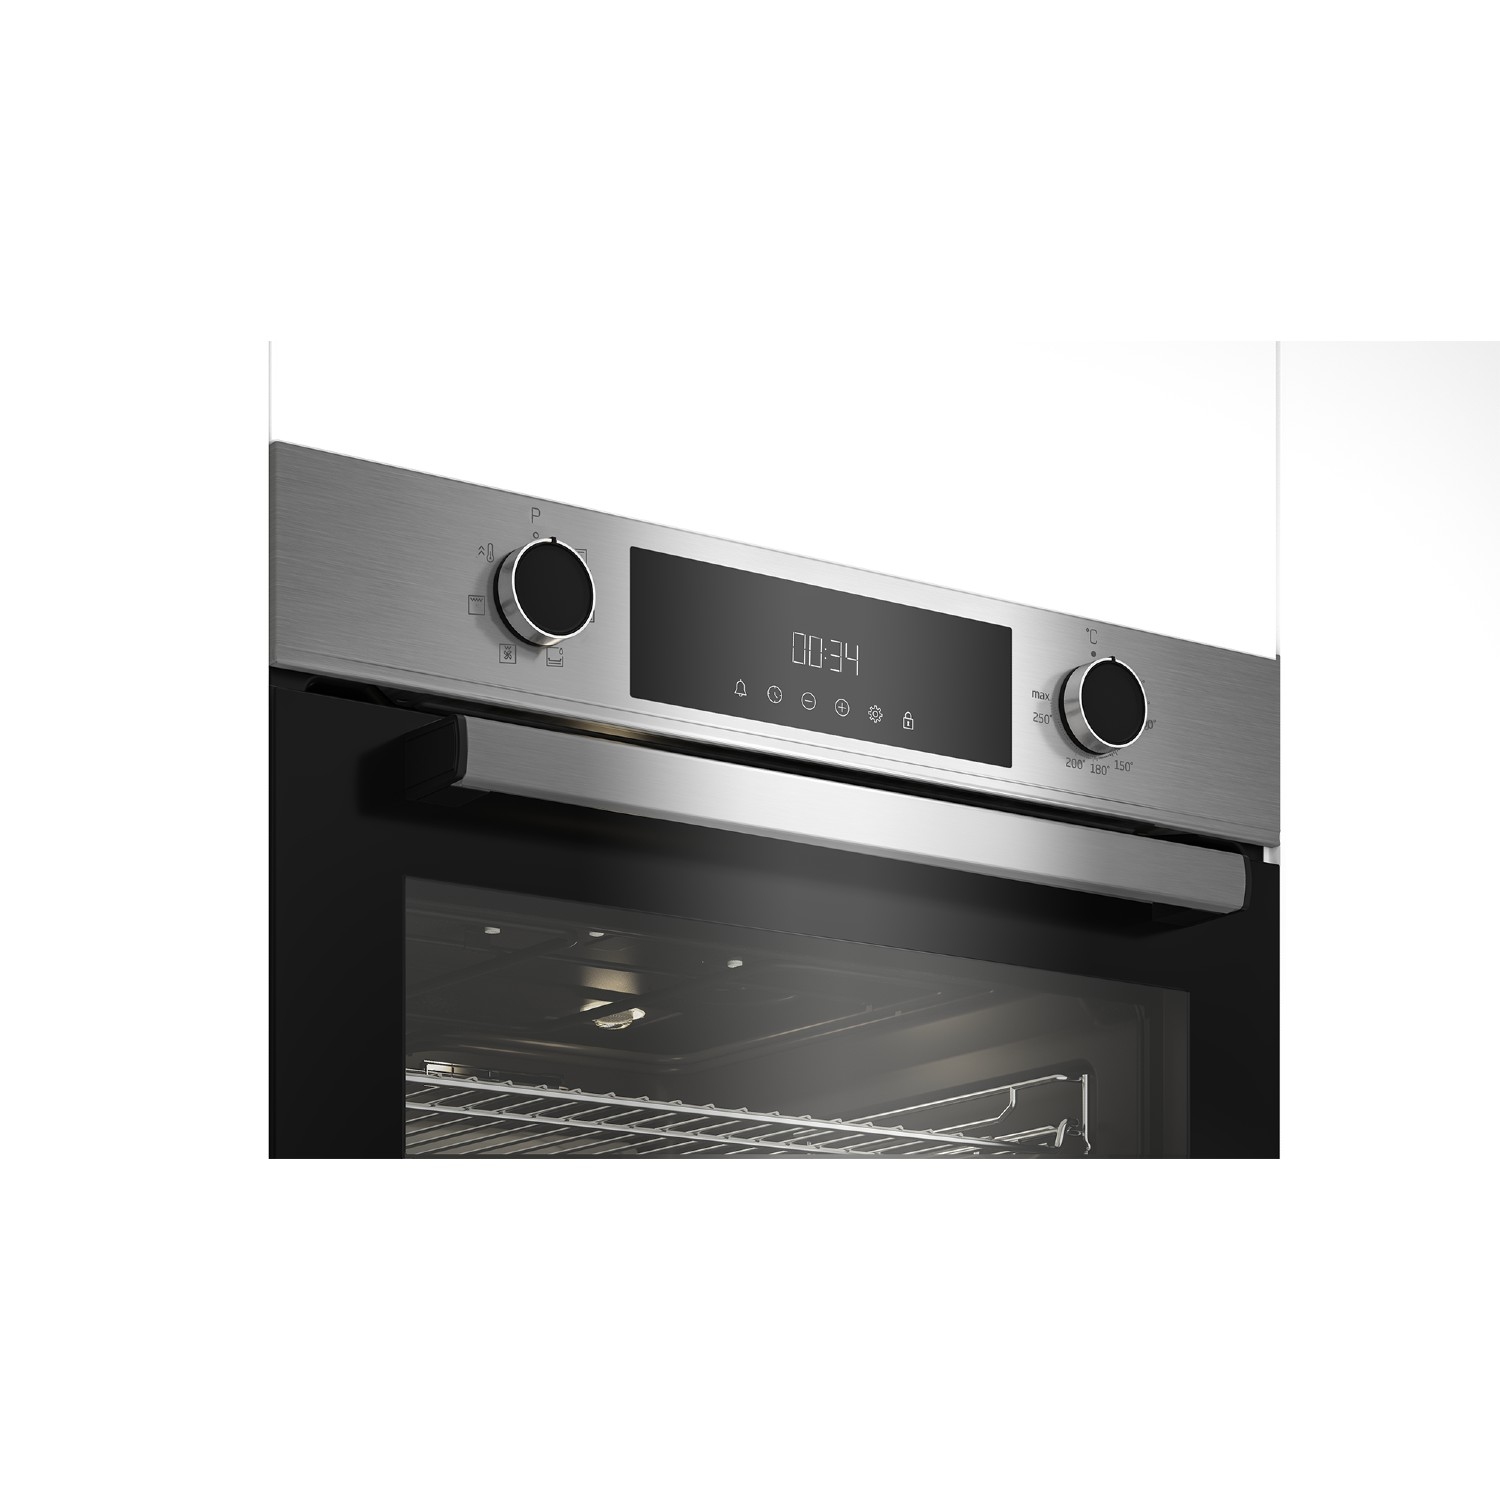 Beko AeroPerfect&trade; CIMY91X 60cm Built In RecycledNet&trade; Single Multi- function Oven - Stainless Steel - 1